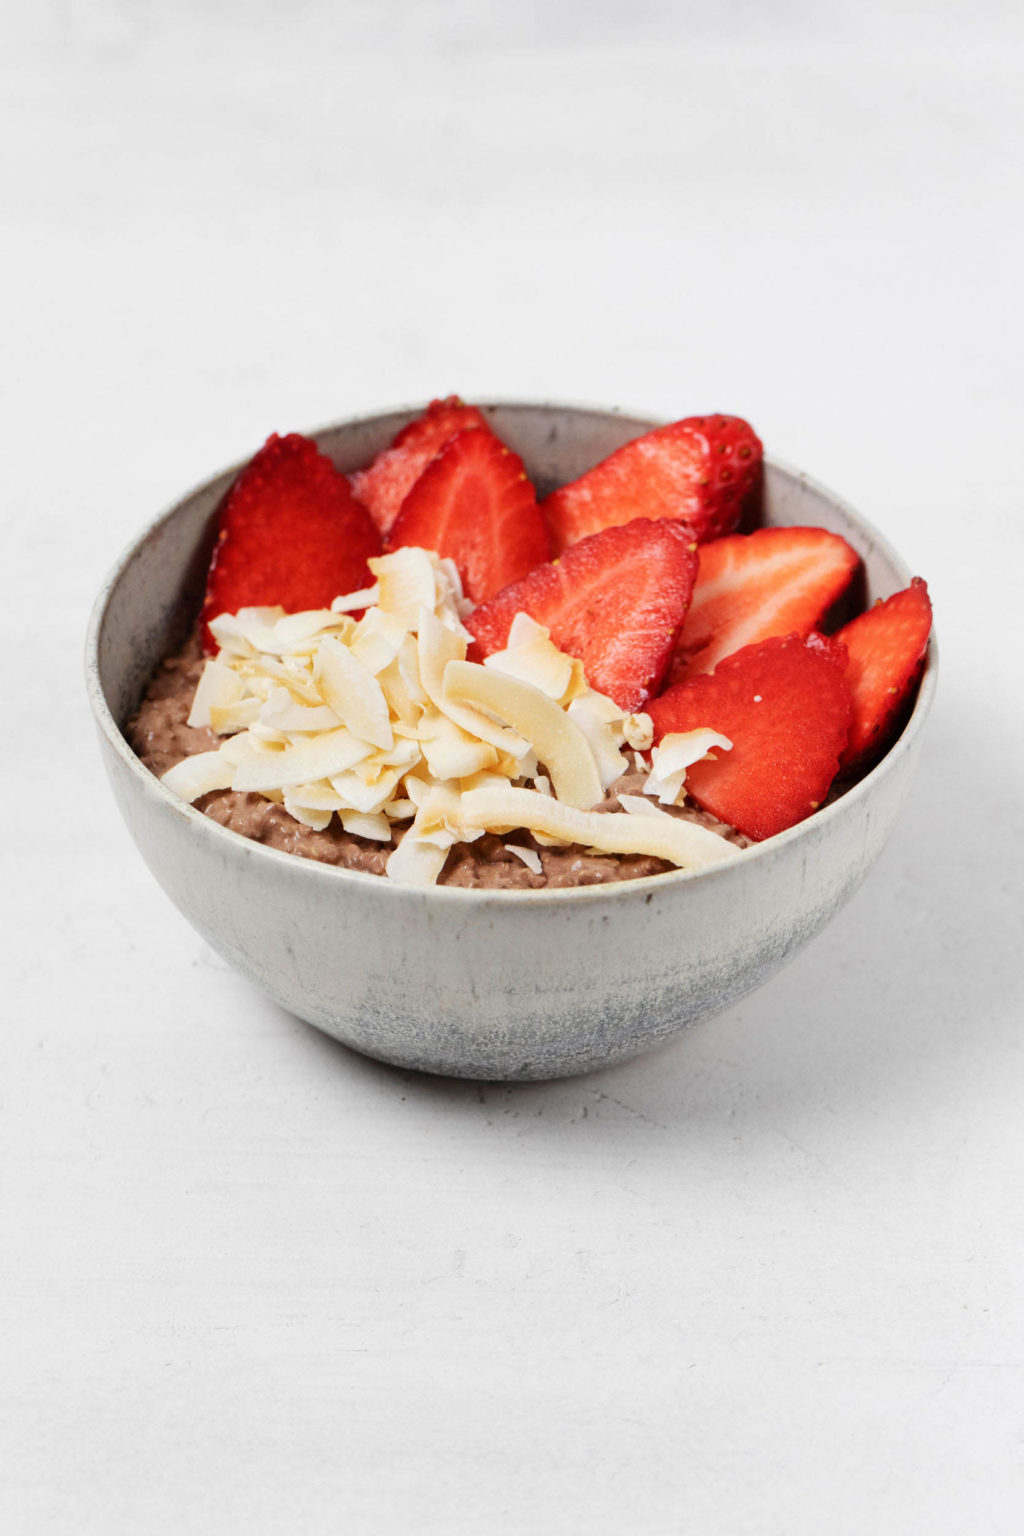 A gray, ceramic bowl contains fresh berries, coconut flakes, and chocolate-infused whole grain.